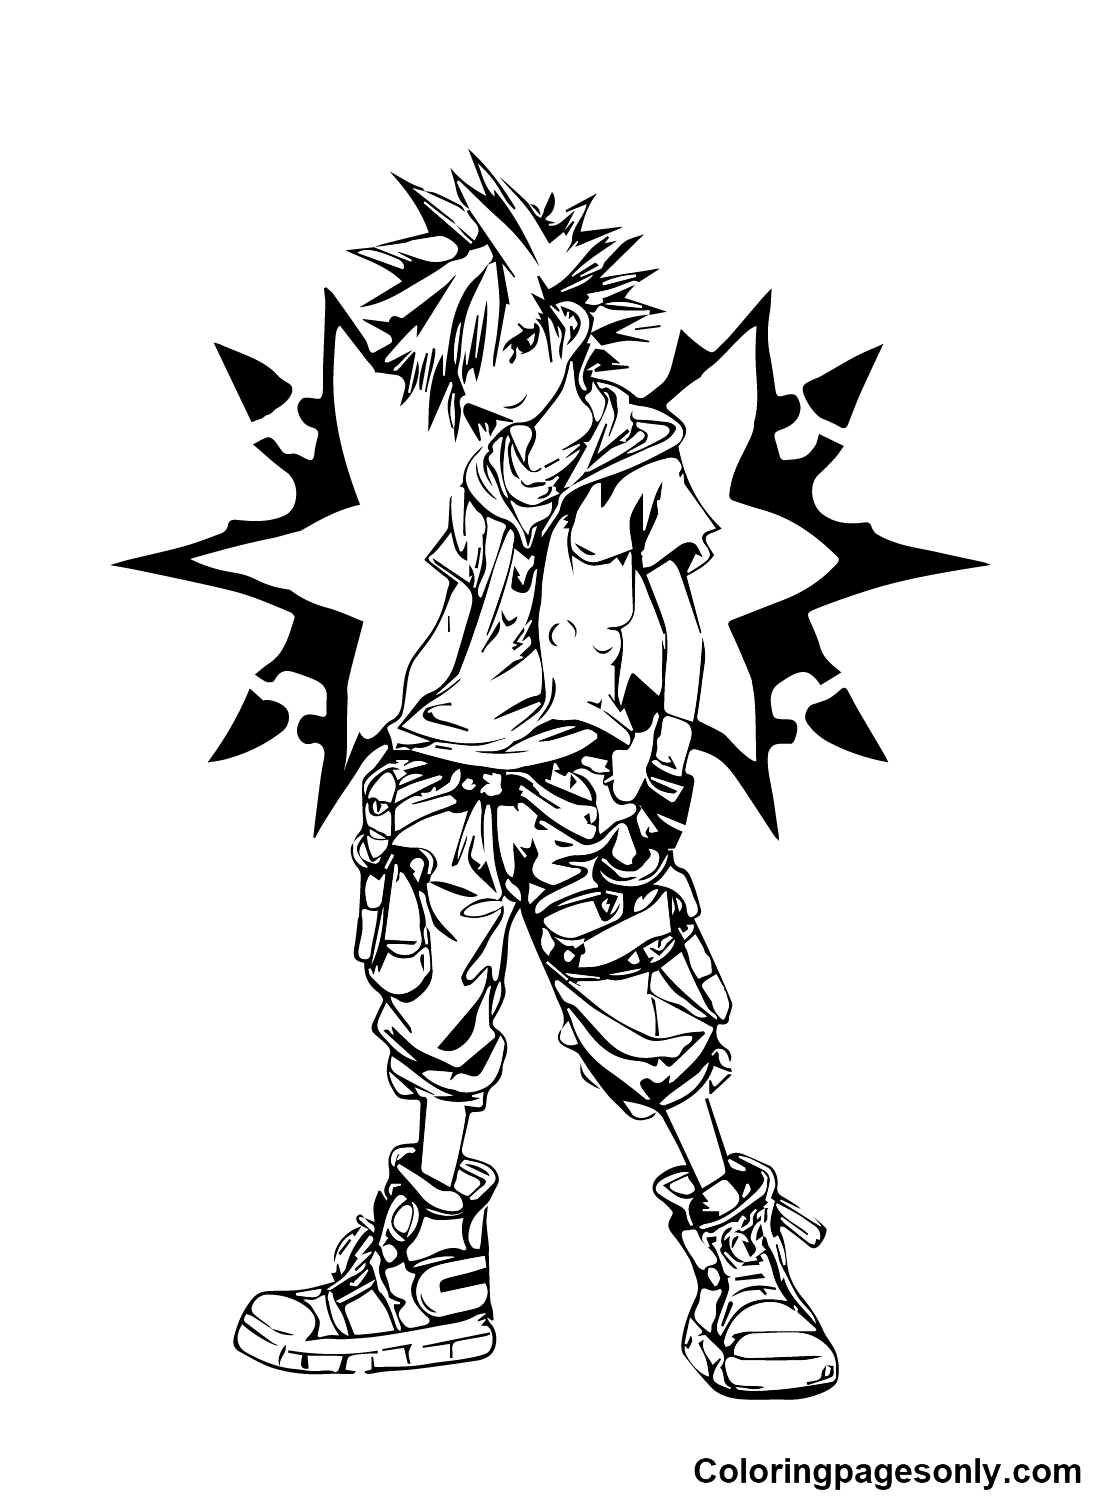 Kingdom Hearts to print Coloring Page